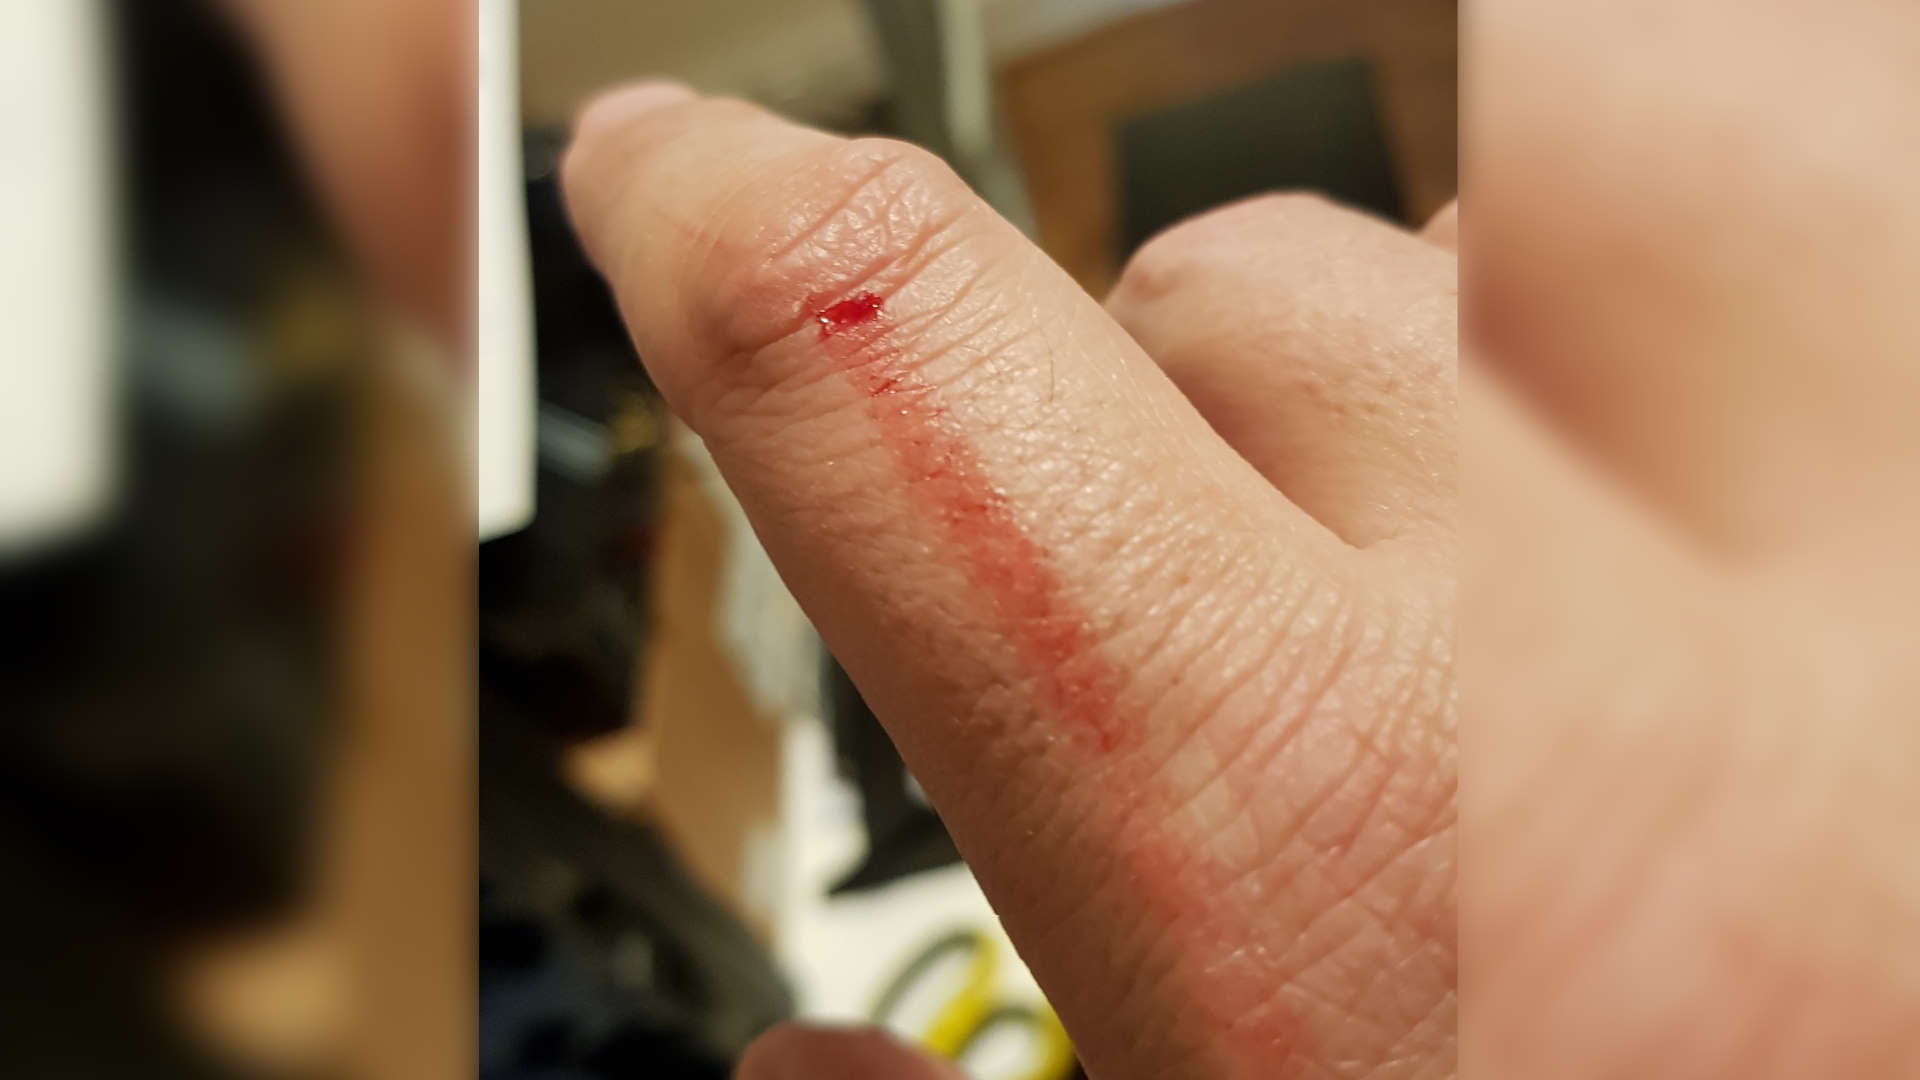 Injury resulting from building the Lian Li desk PC chassis